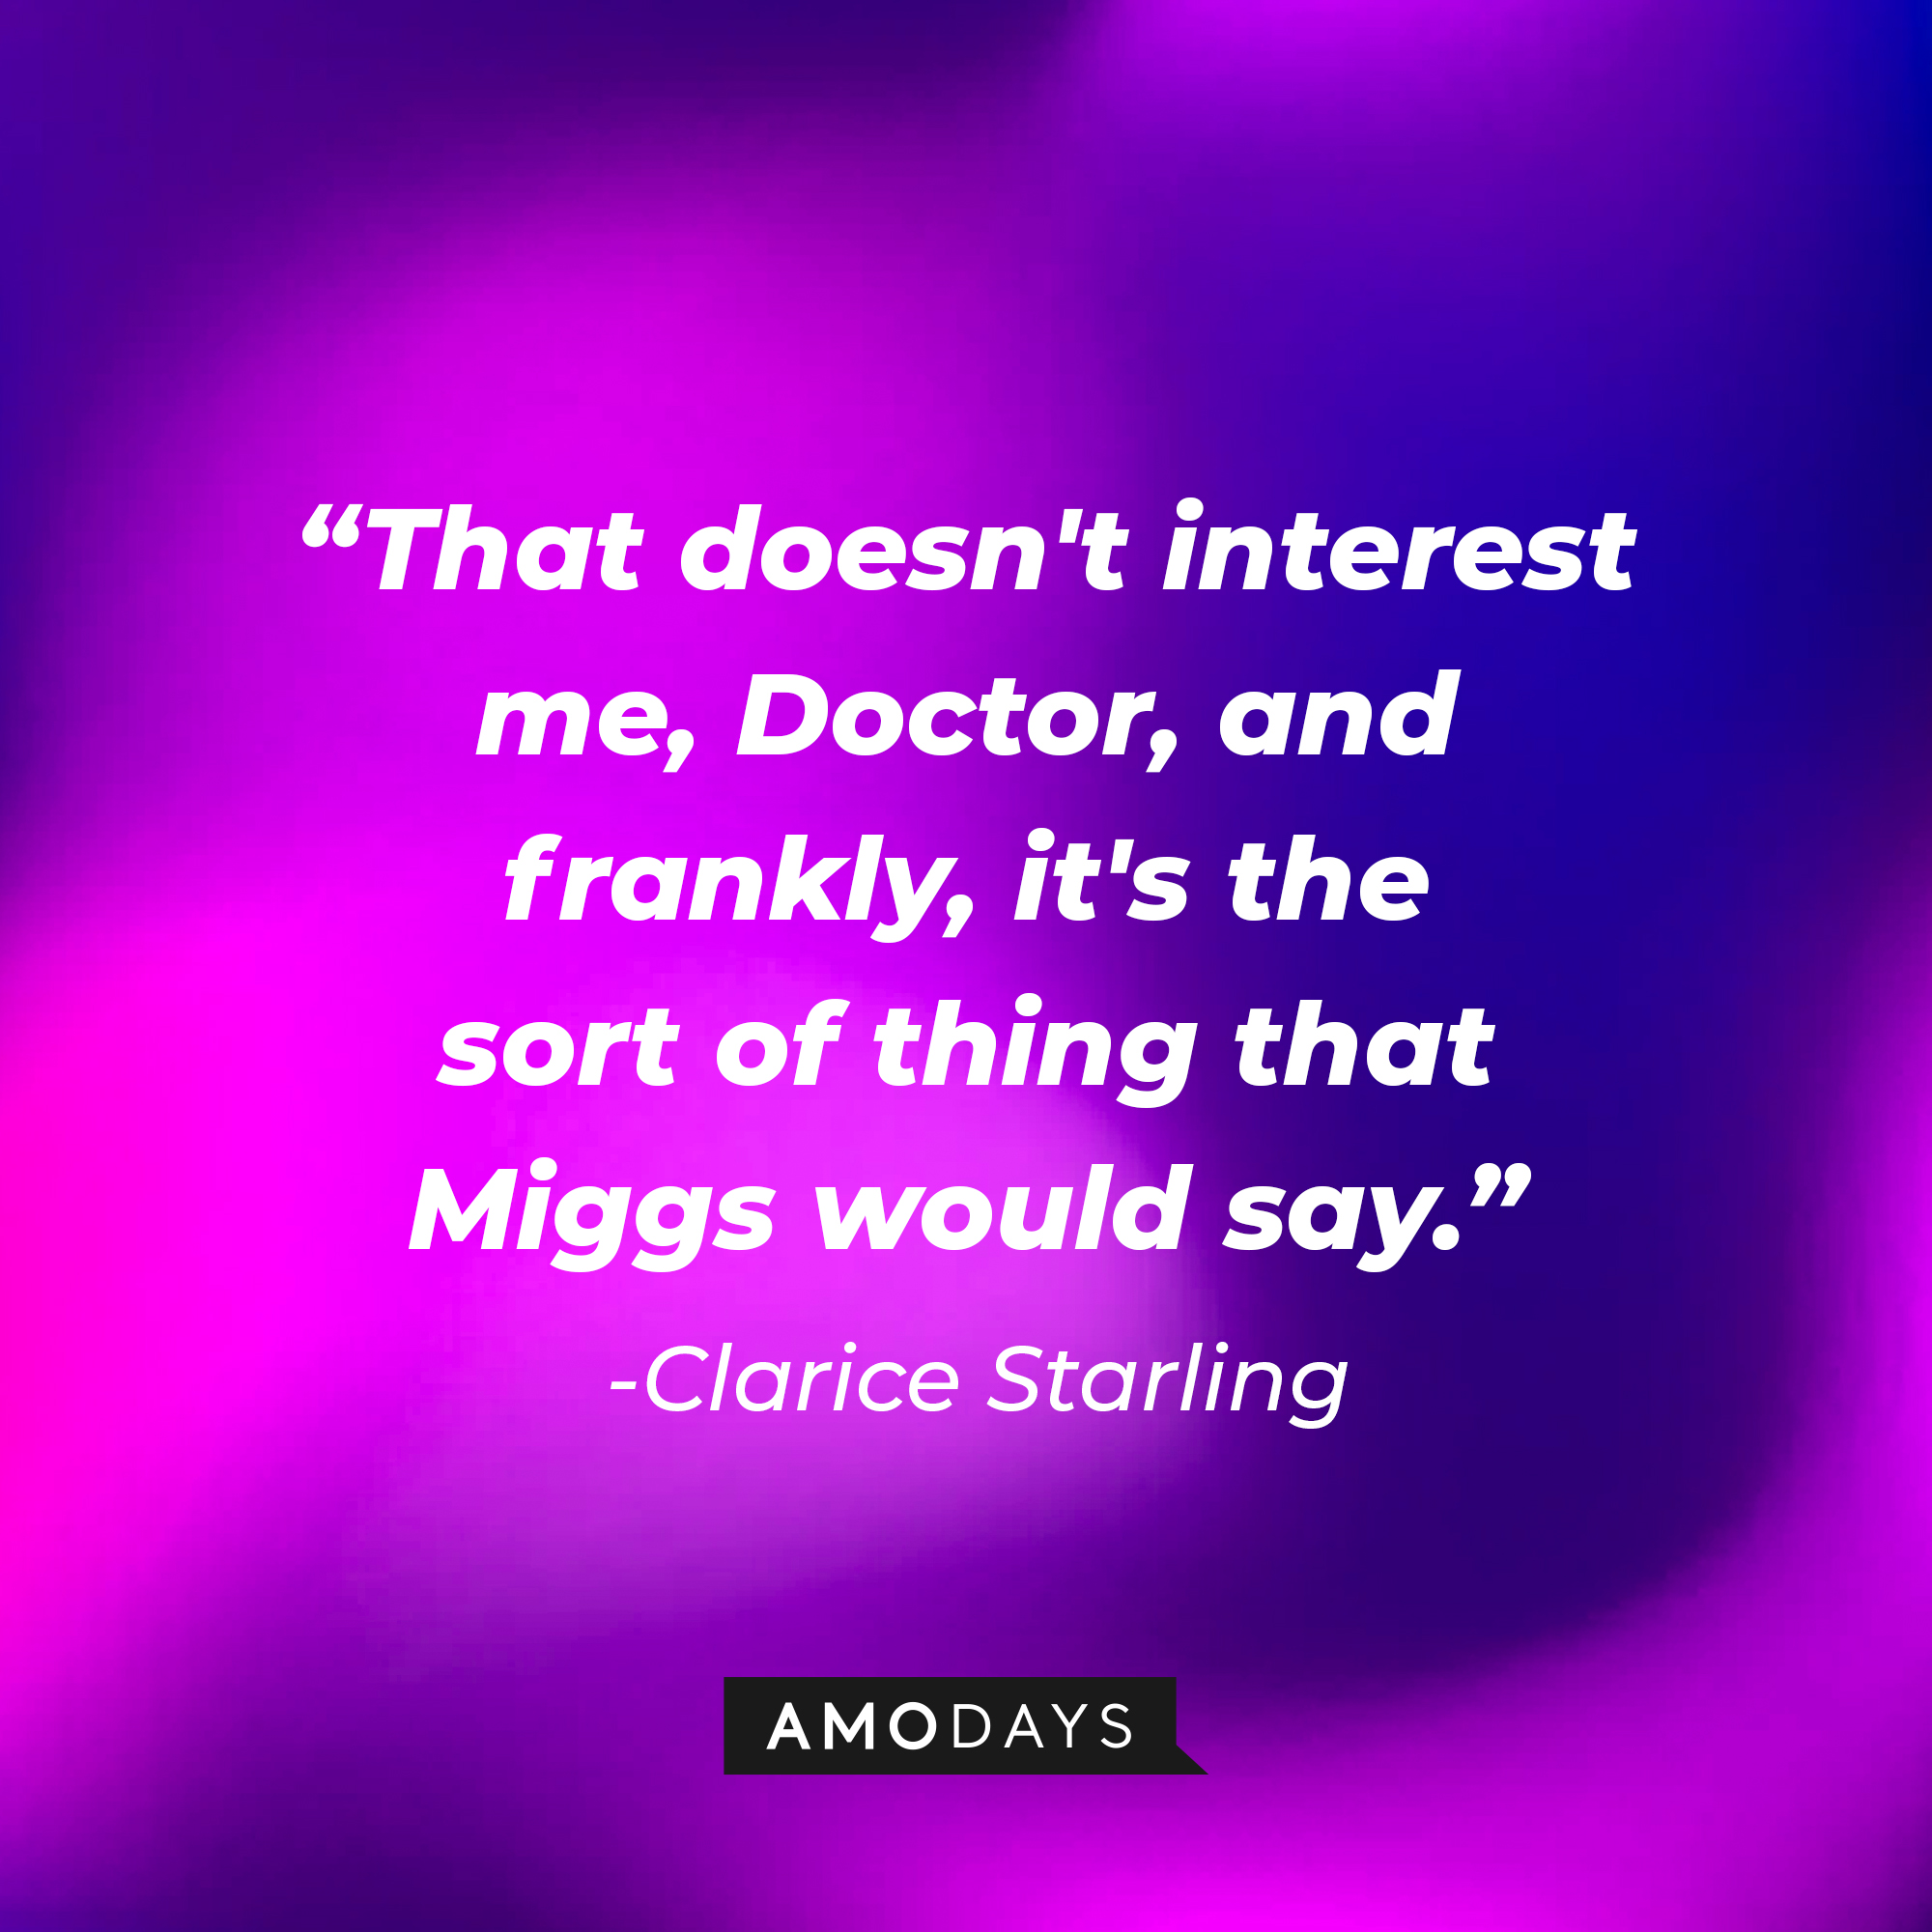 Clarice Starling's quote from "The Silence of the Lambs:" "That doesn't interest me, Doctor, and frankly, it's the sort of thing that Miggs would say." | Source: AmoDays